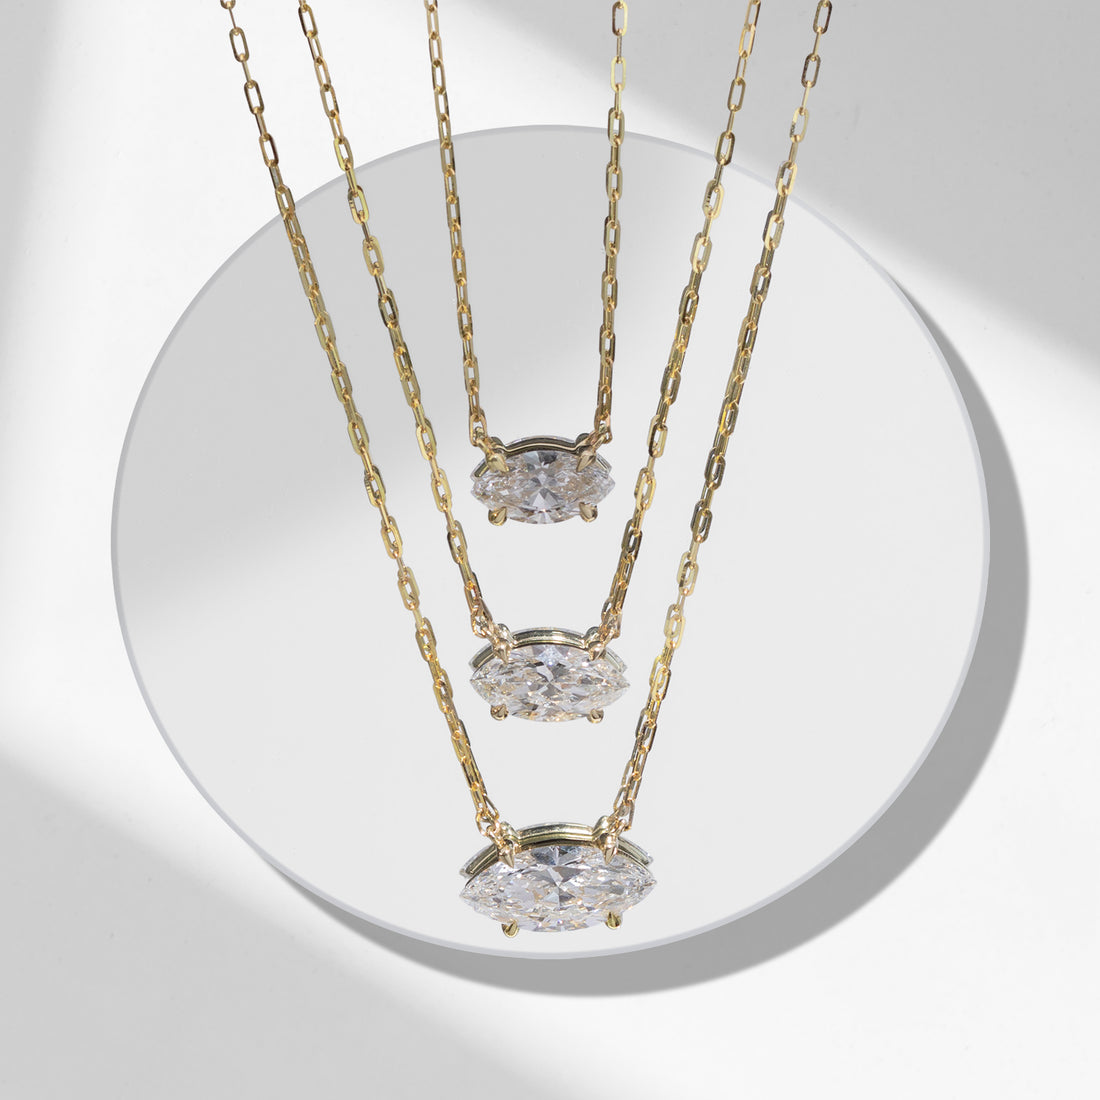 Three ILA SODHANI Protection Necklaces with different sized eye-shaped natural diamonds hanging from yellow gold chains; the necklaces are hanging stacked over a white plate.